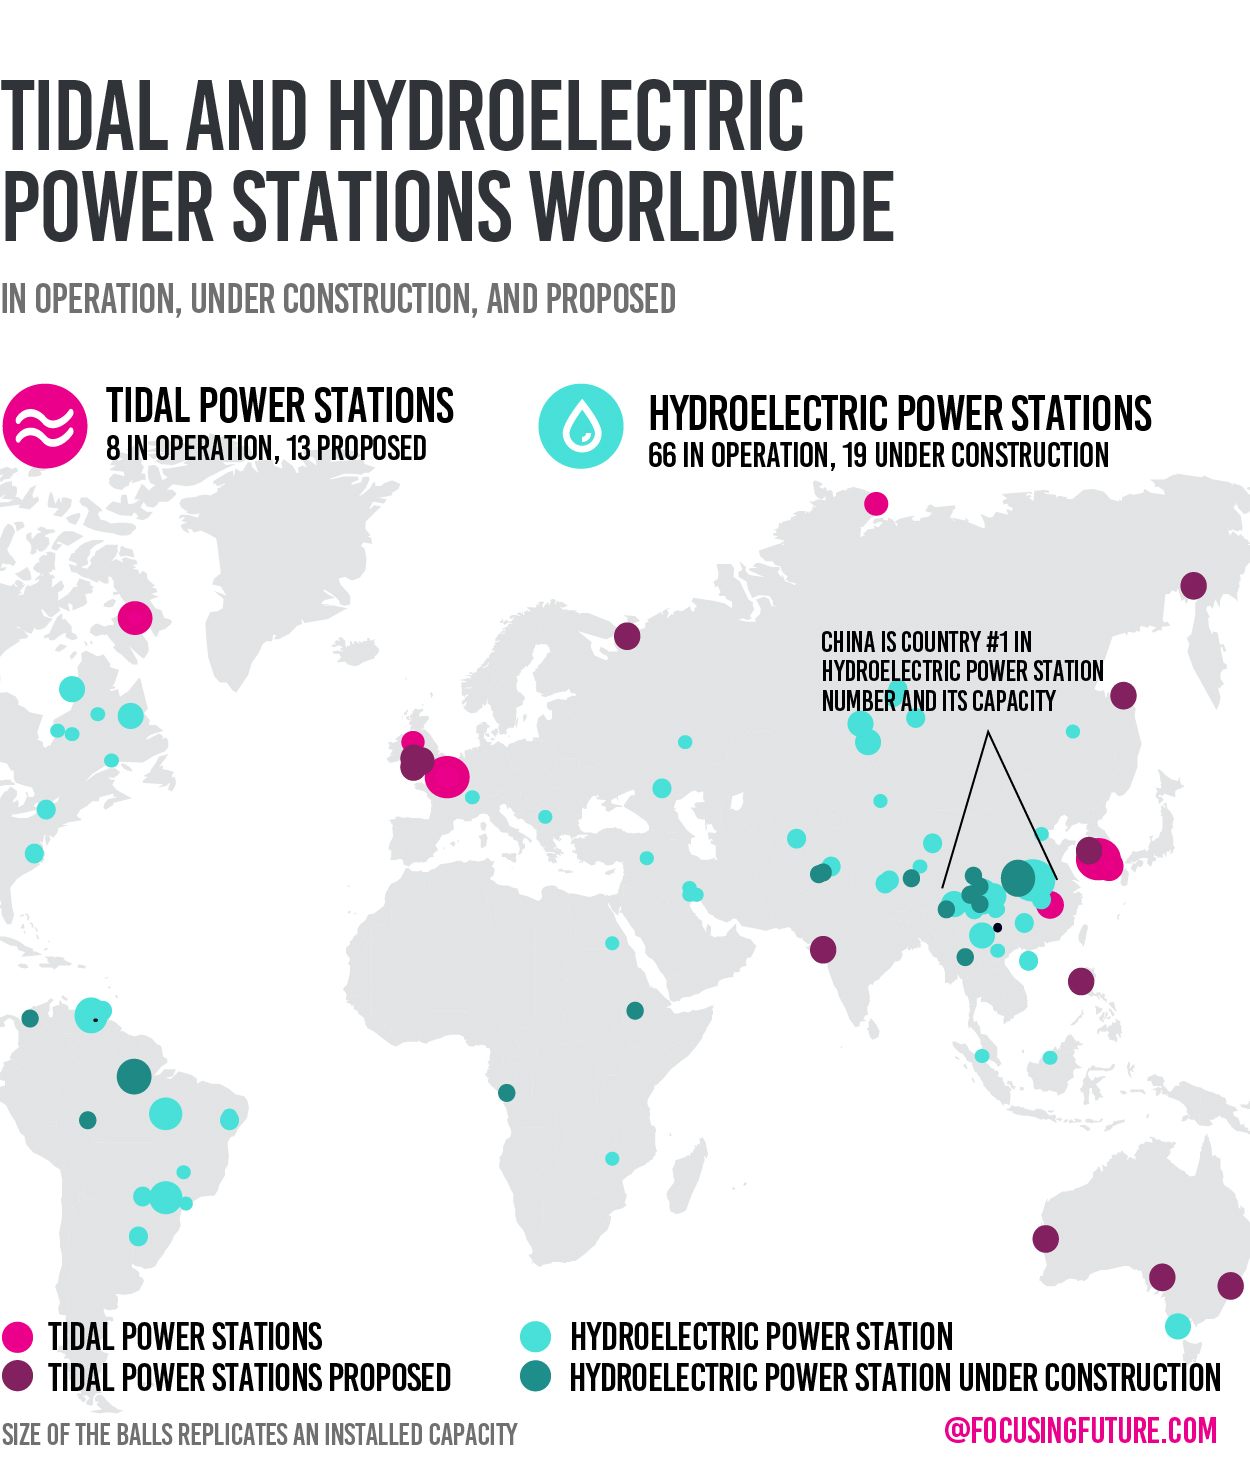 Tidal and hydroelectric power stations worldwide